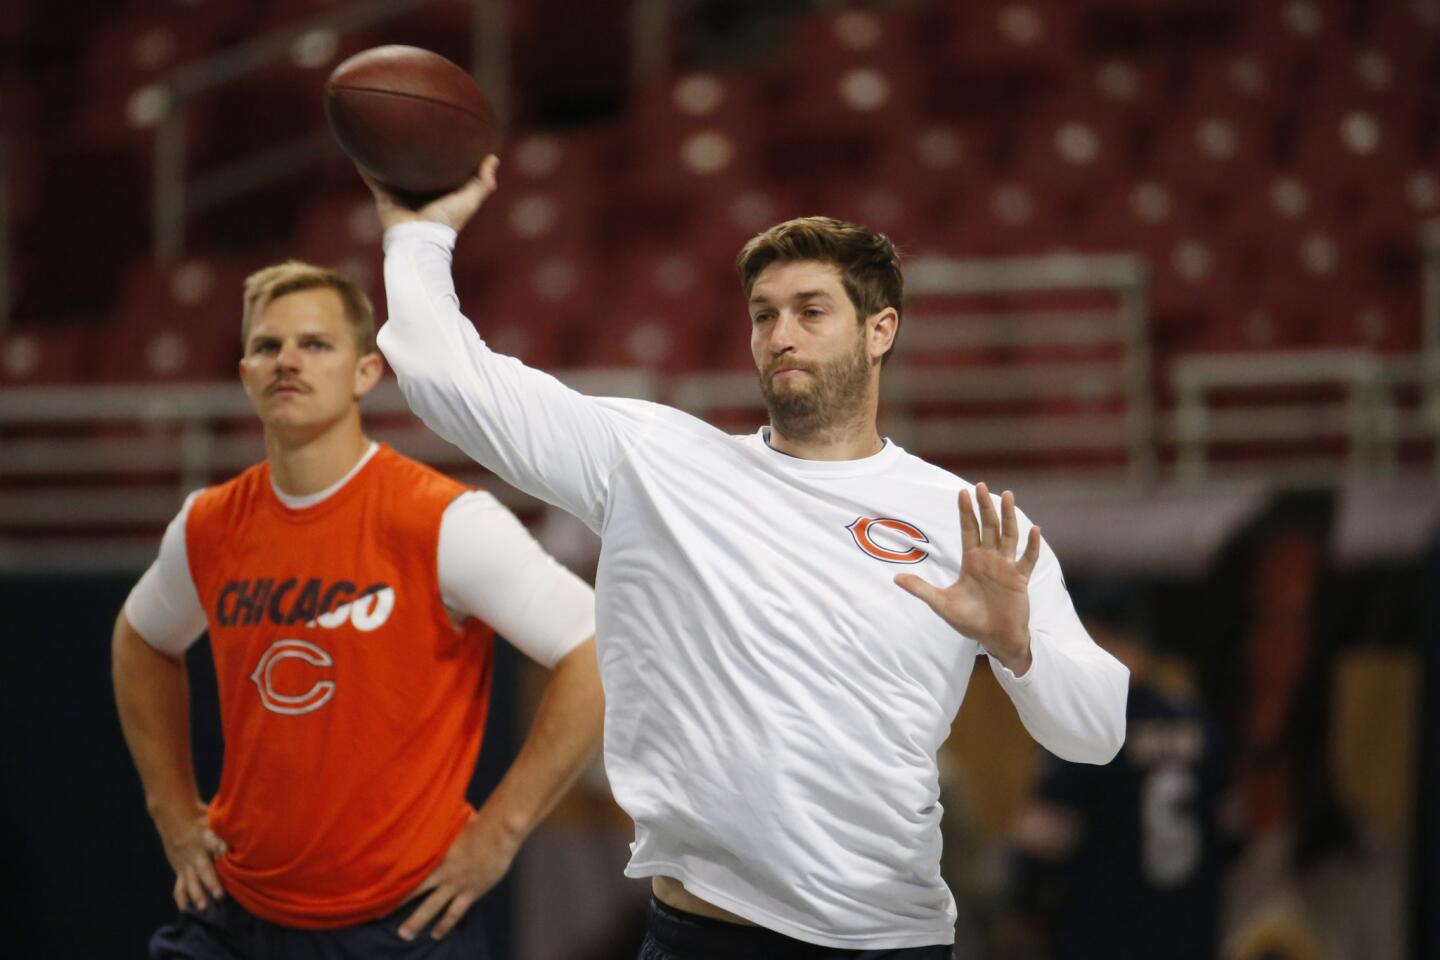 Jay Cutler throws during warm-ups as Jimmy Clausen looks on before the game against the Rams.